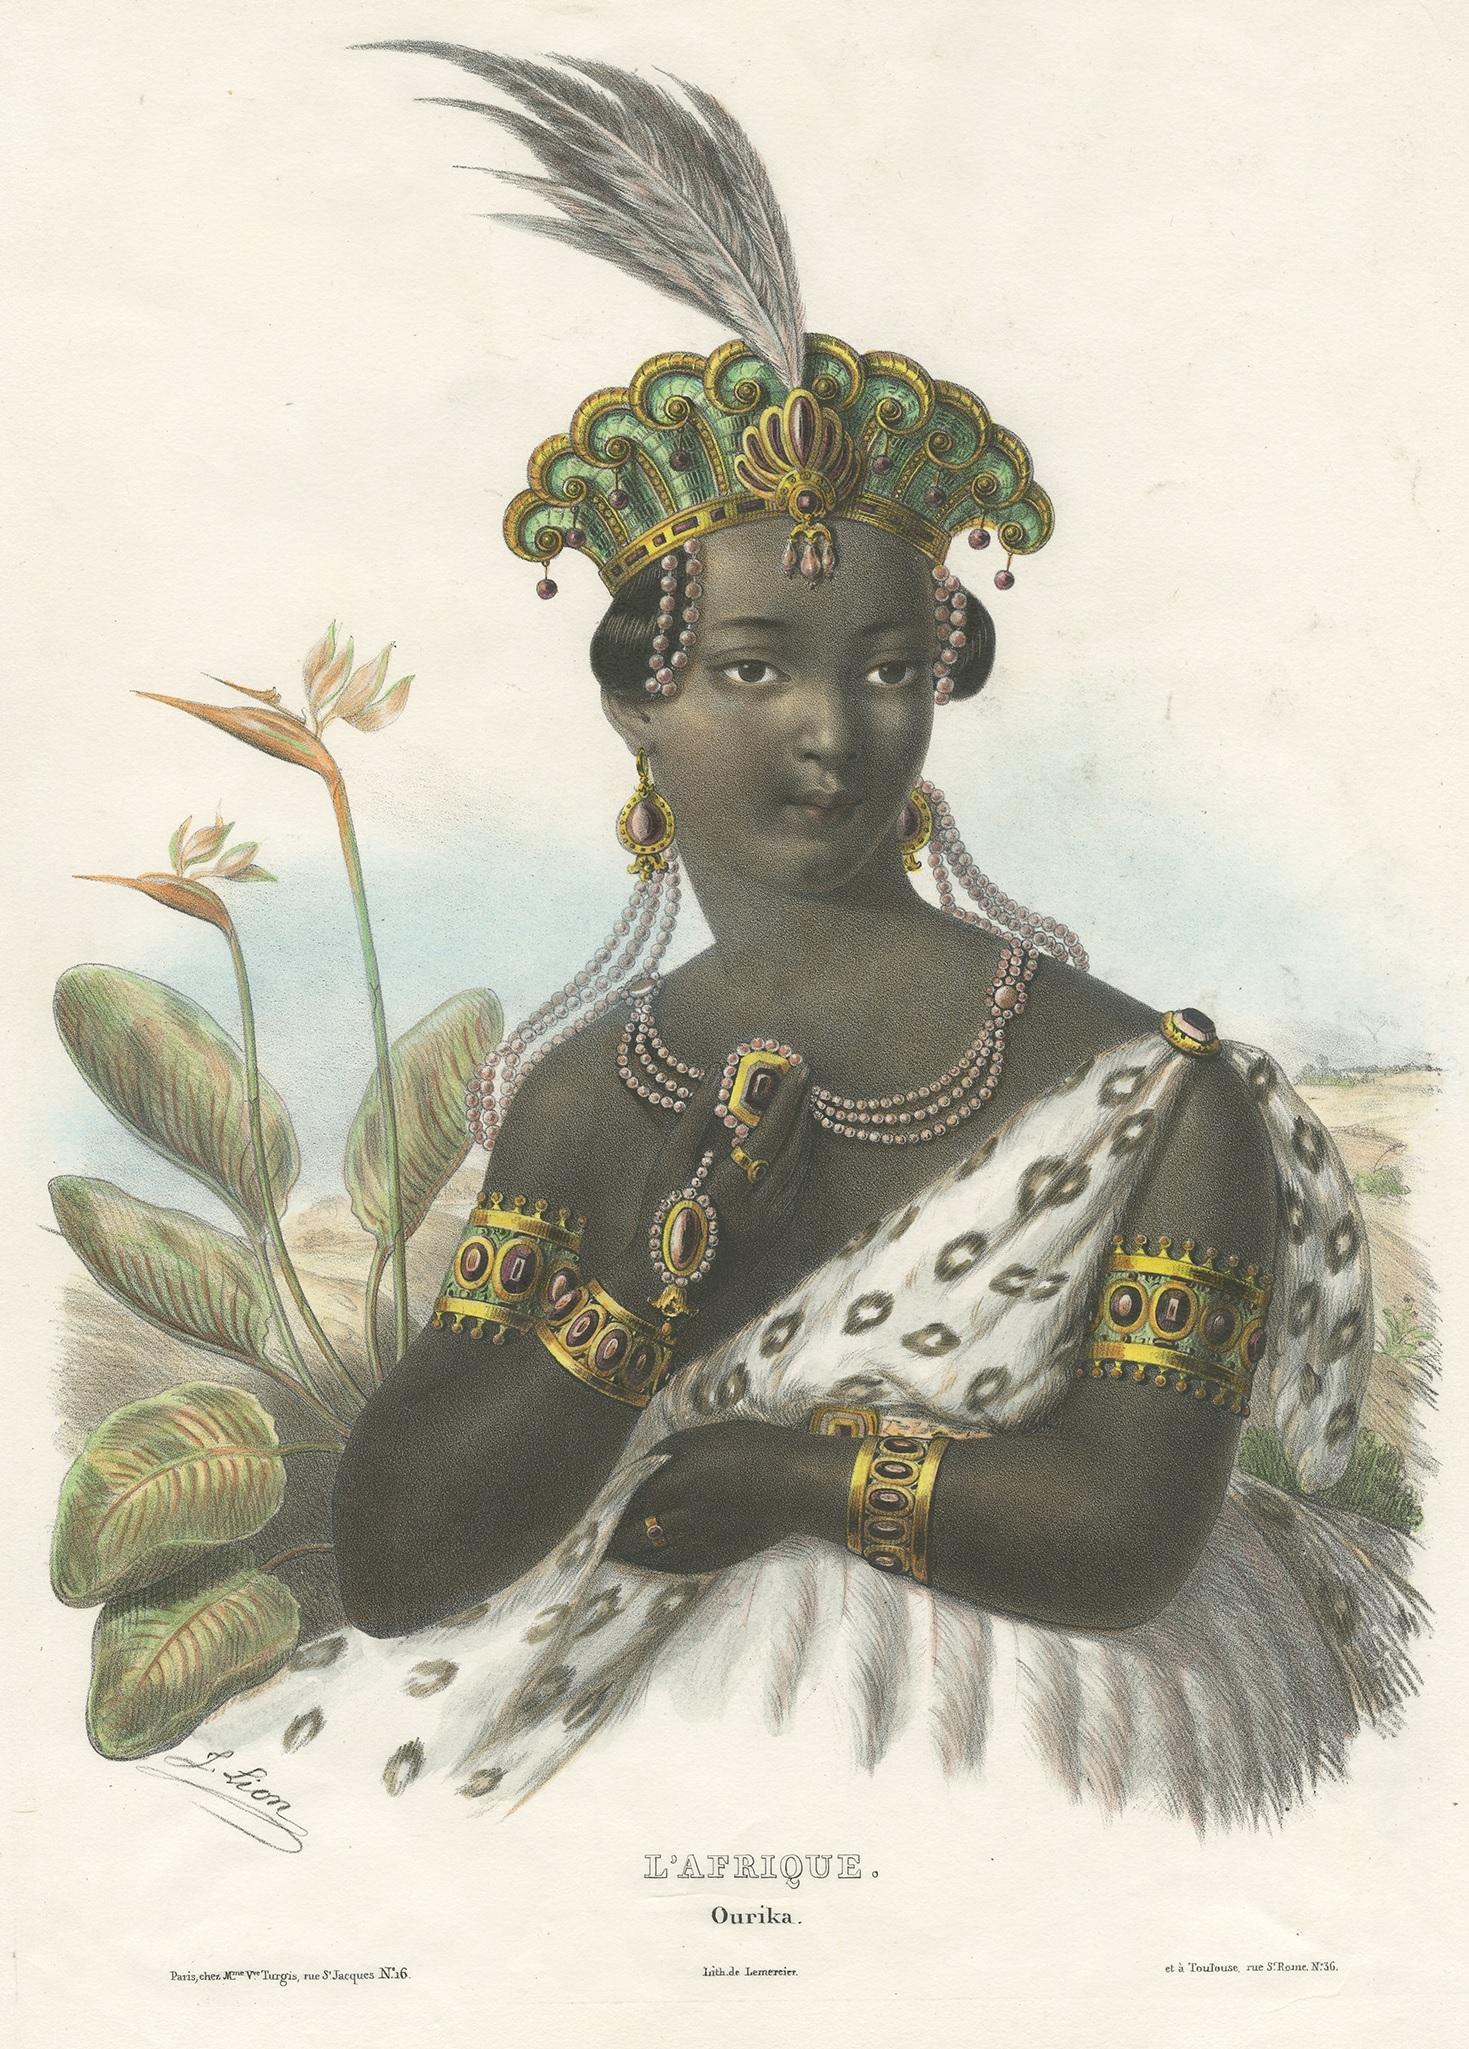 Antique print titled 'L'Afrique - Ourika'. Beautiful lithograph of an African costume. Lithographed by Lemercier, circa 1840.